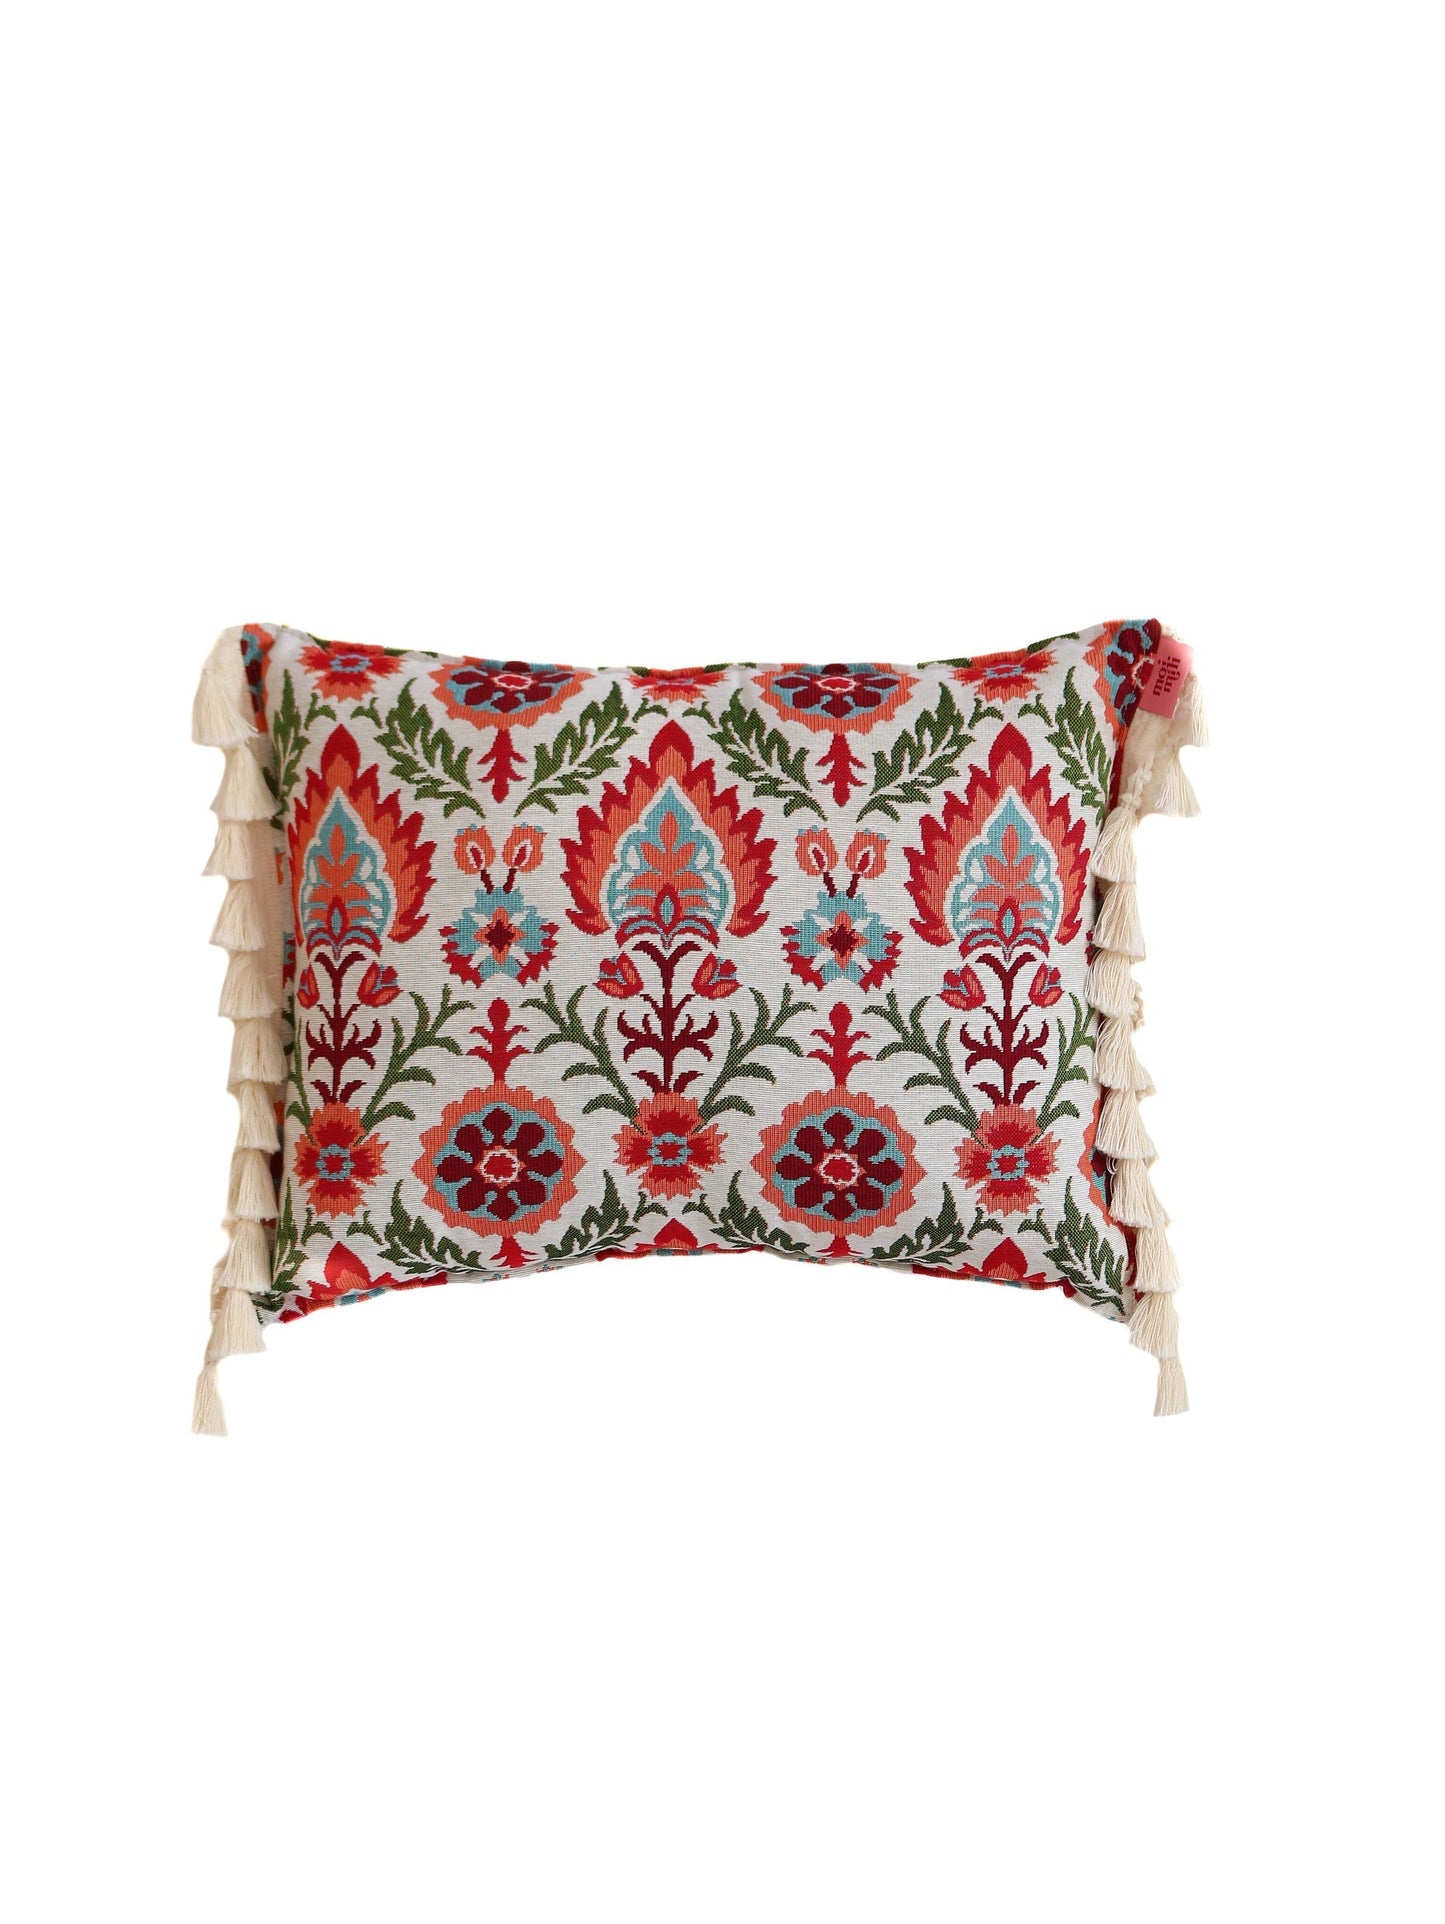 "Scarlet Iris in Cancaya" Pillow with Fringe